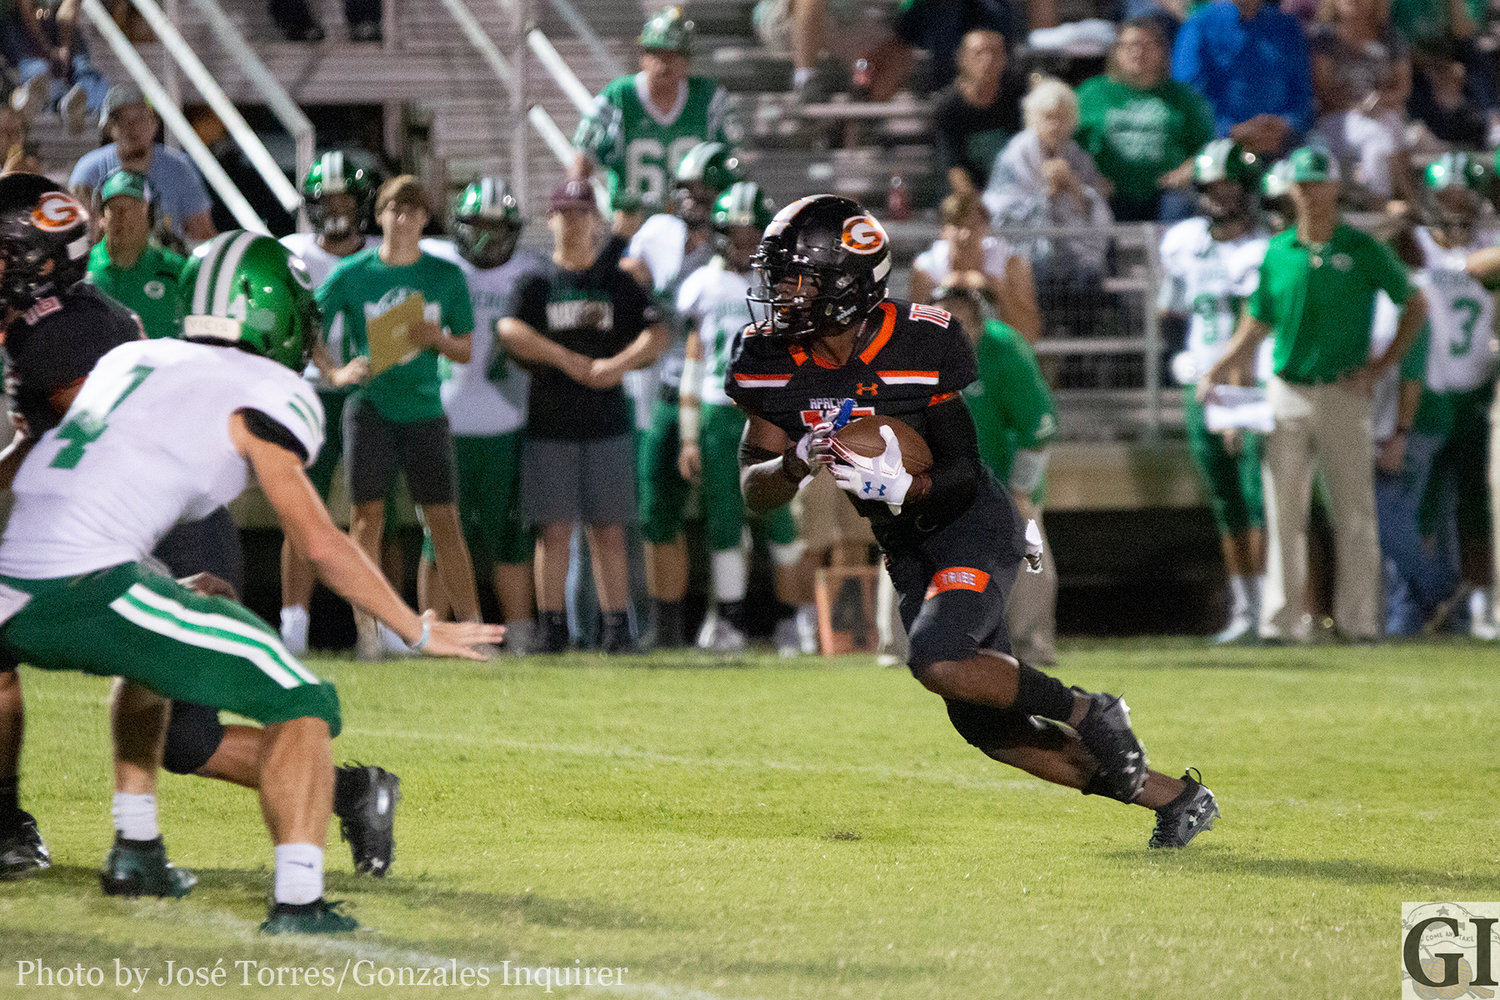 Arbreyon Dora (10) scoots his way to the end zone as the Apaches knock off Cuero 21-20. Dora scored twice in the one-point victory.